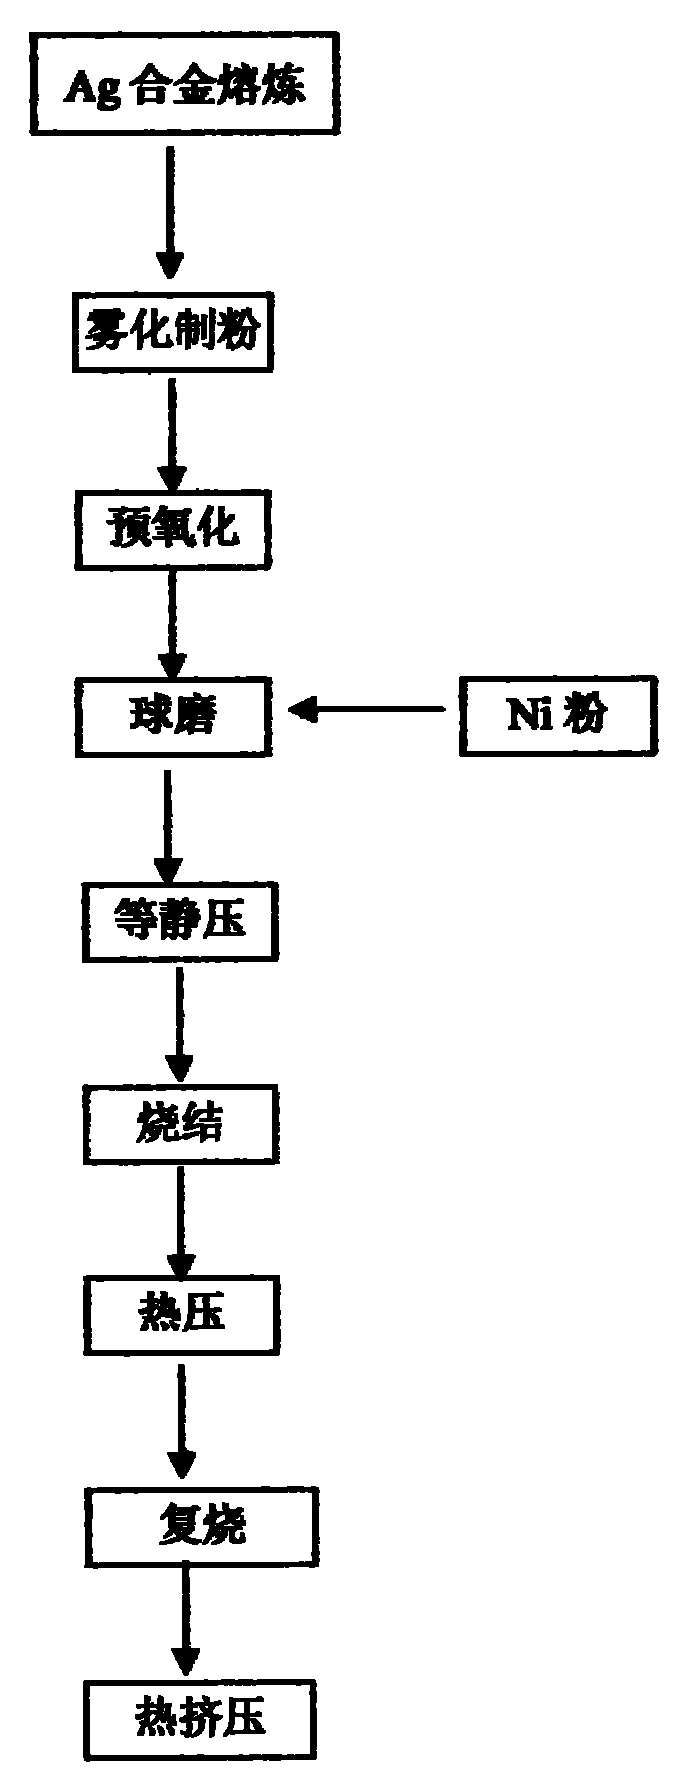 Ag-Ni-oxide electrical contact material and preparation method thereof